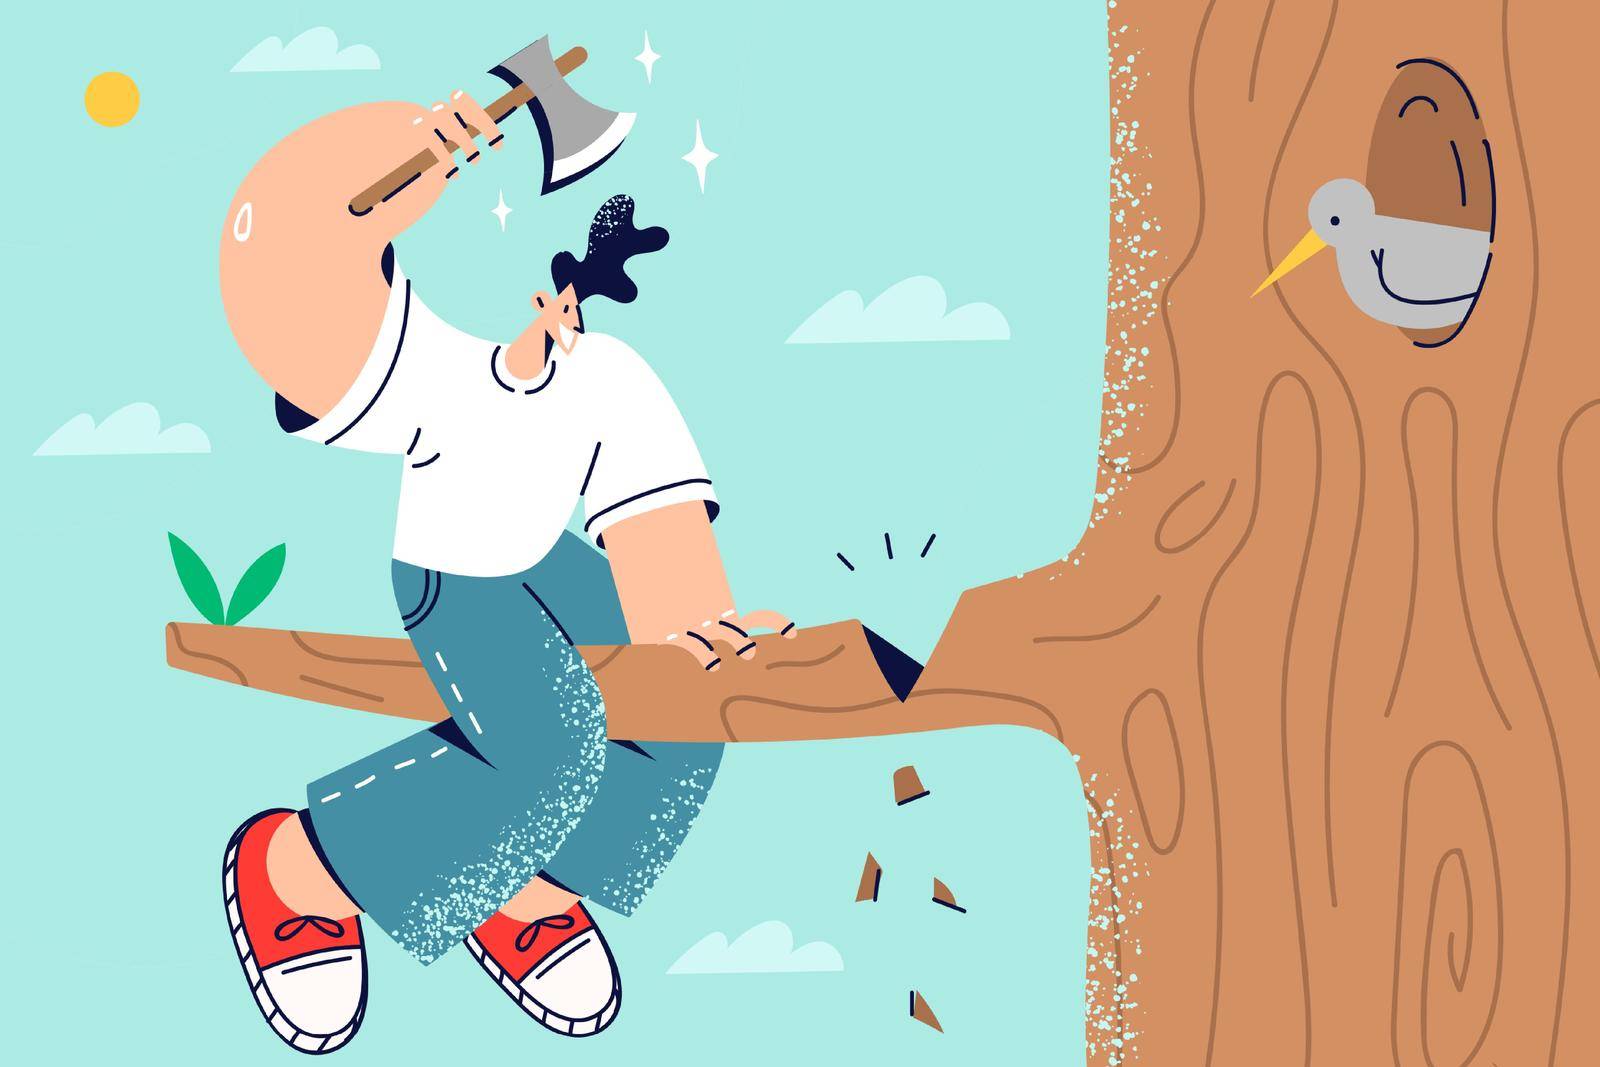 Stupid man cut branch where he sit. Unreasonable male employee involved in risky business affair. Vector illustration.